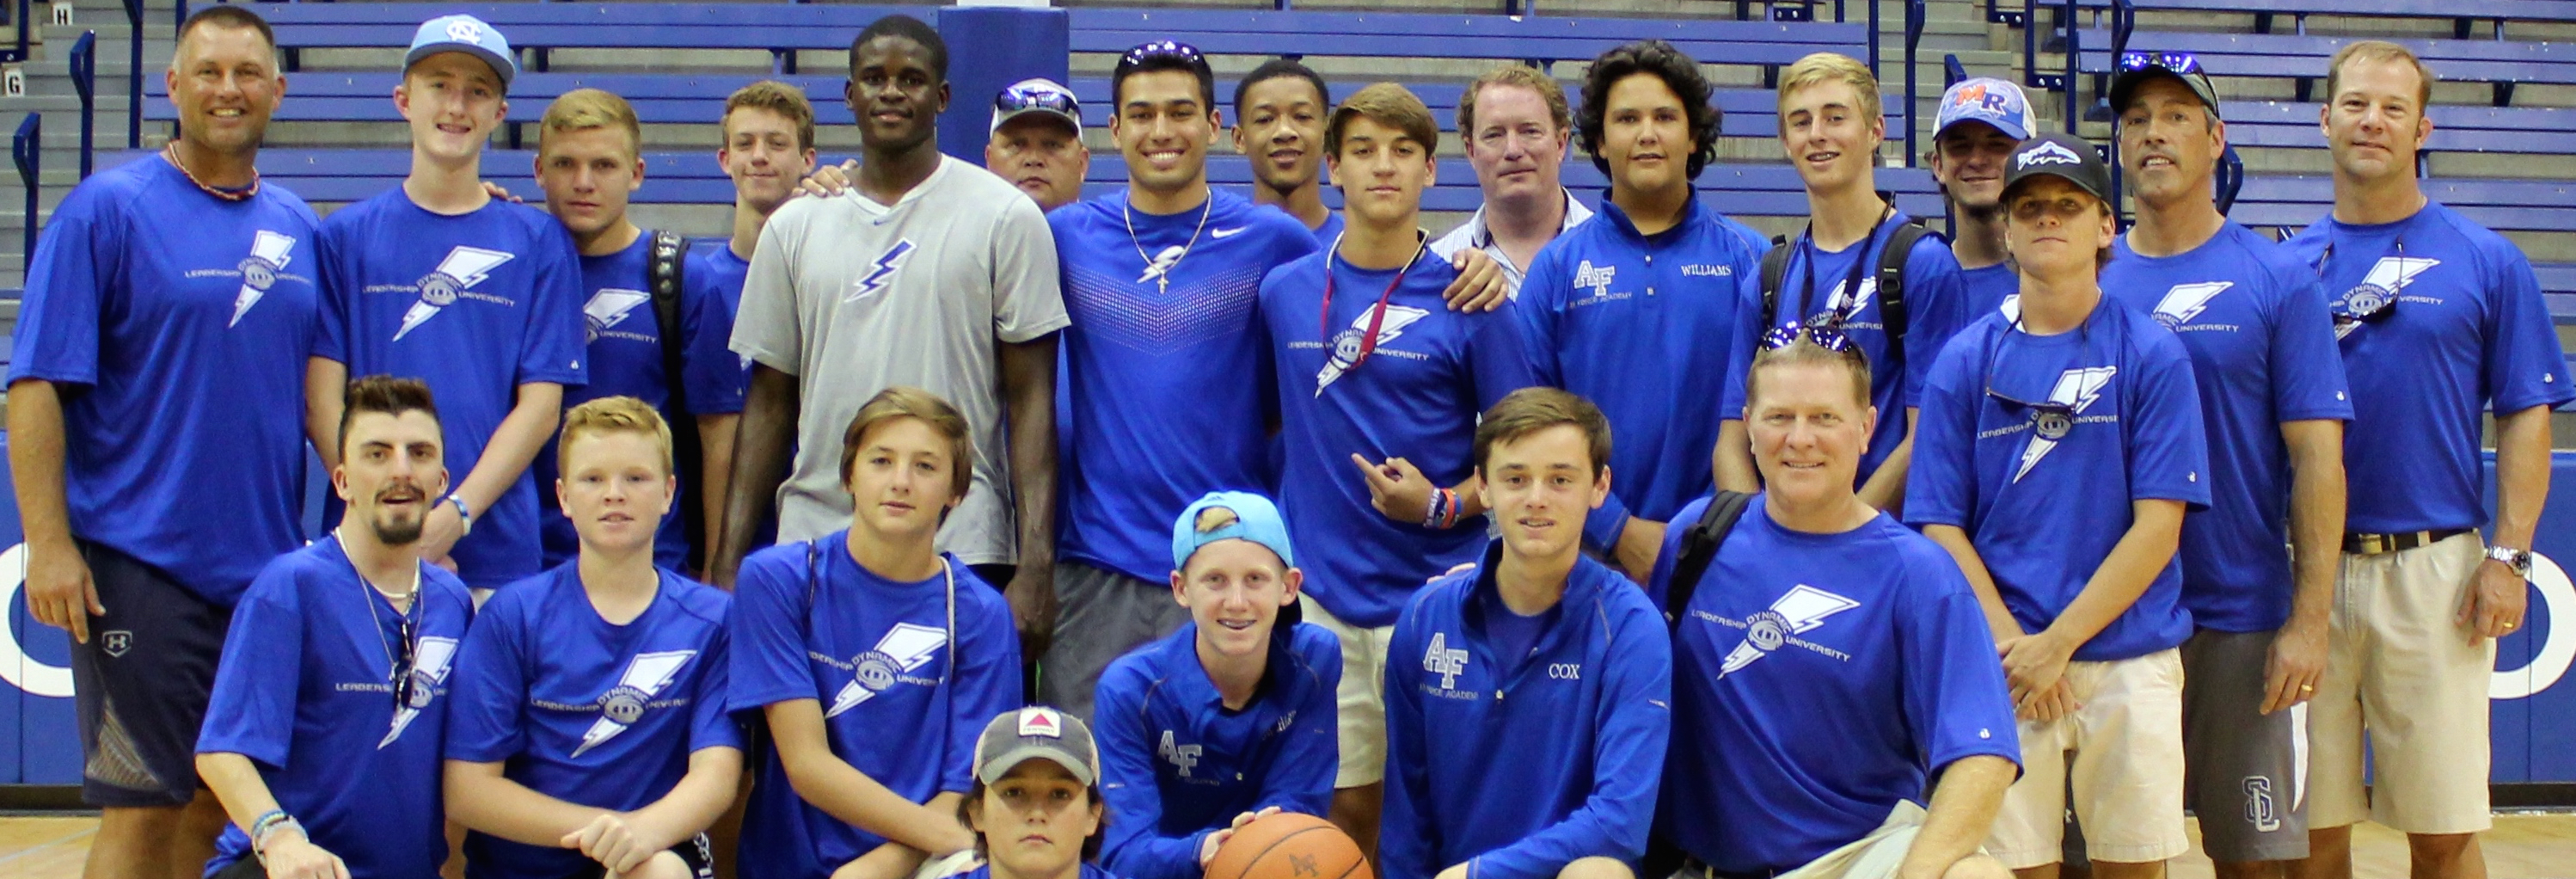 AF Bball cropped group2